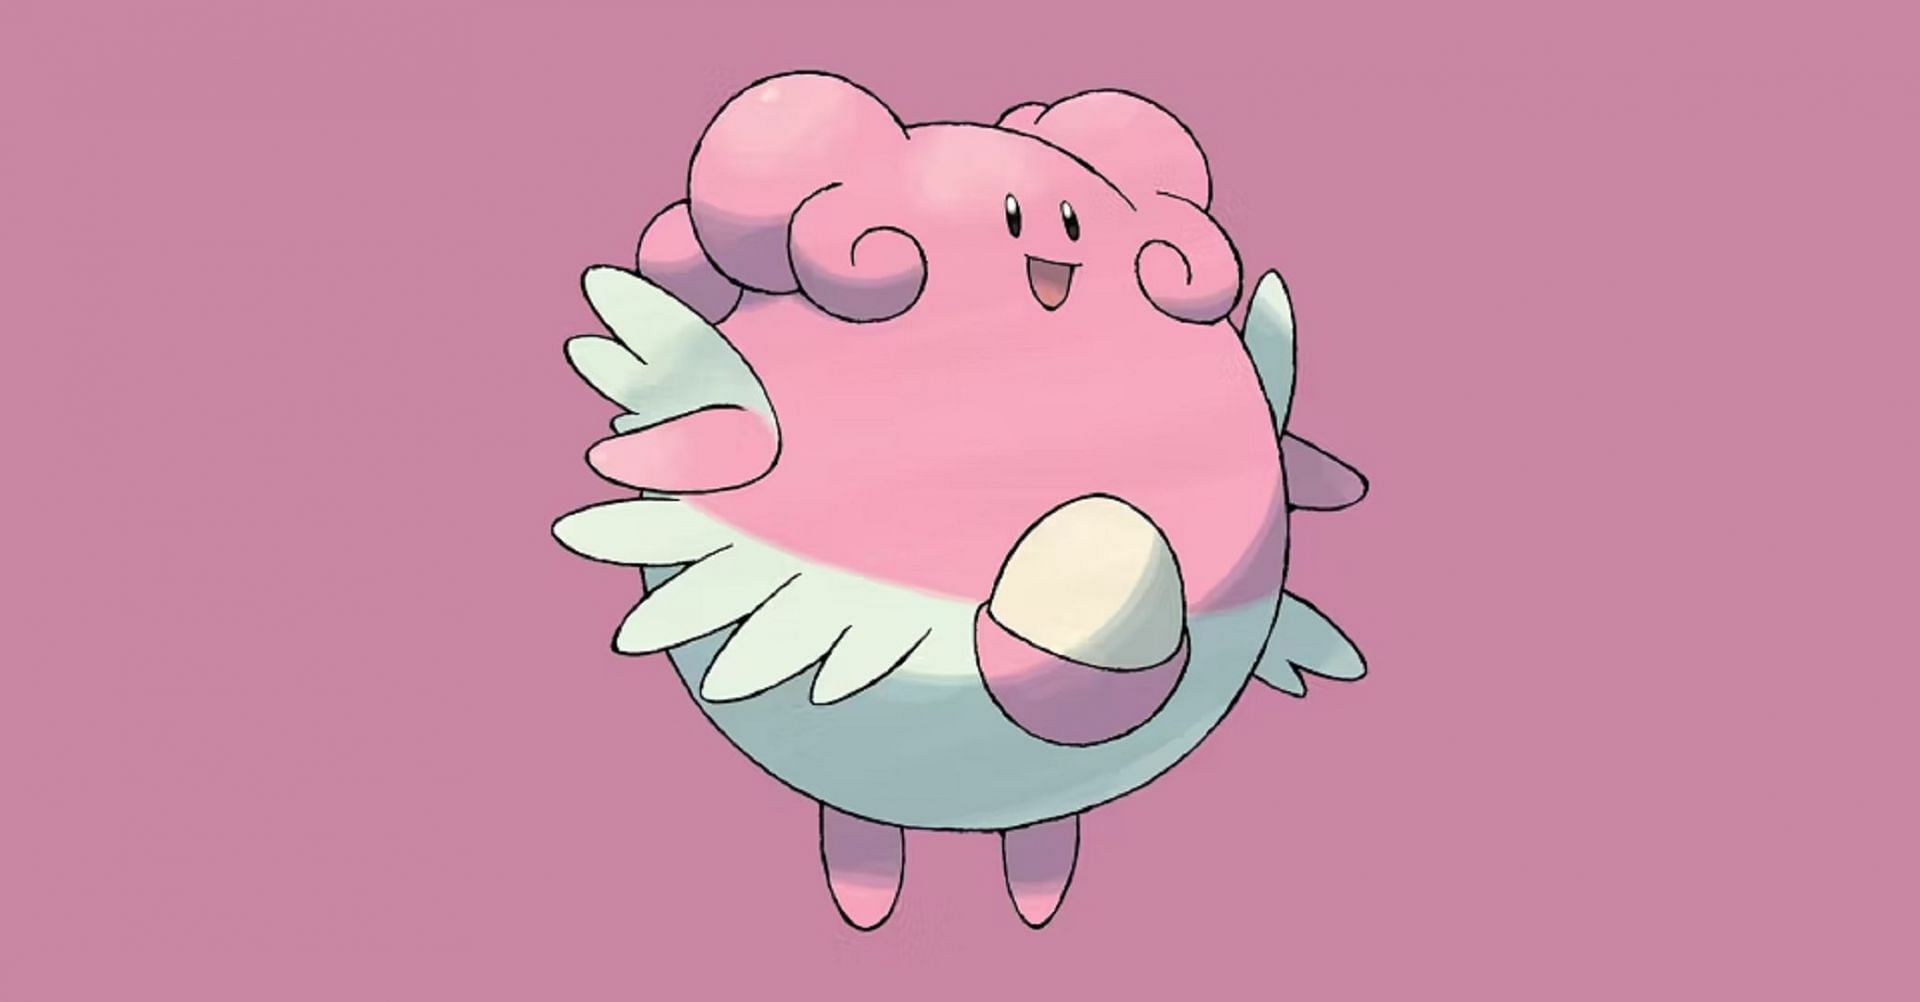 Blissey is an absolute tank in Pokemon GO (Image via The Pokemon Company)